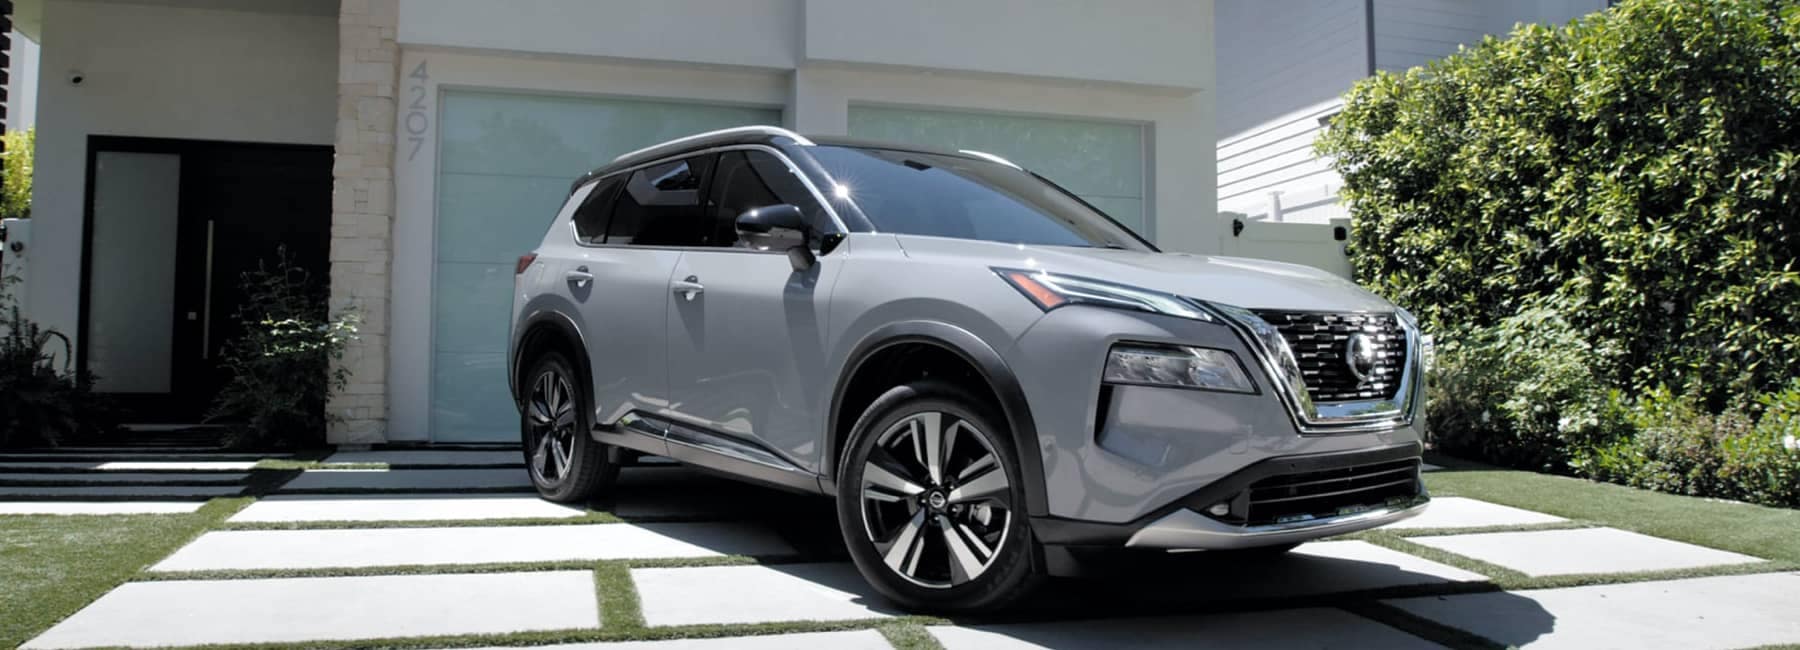 2022 Nissan Rogue in Driveway